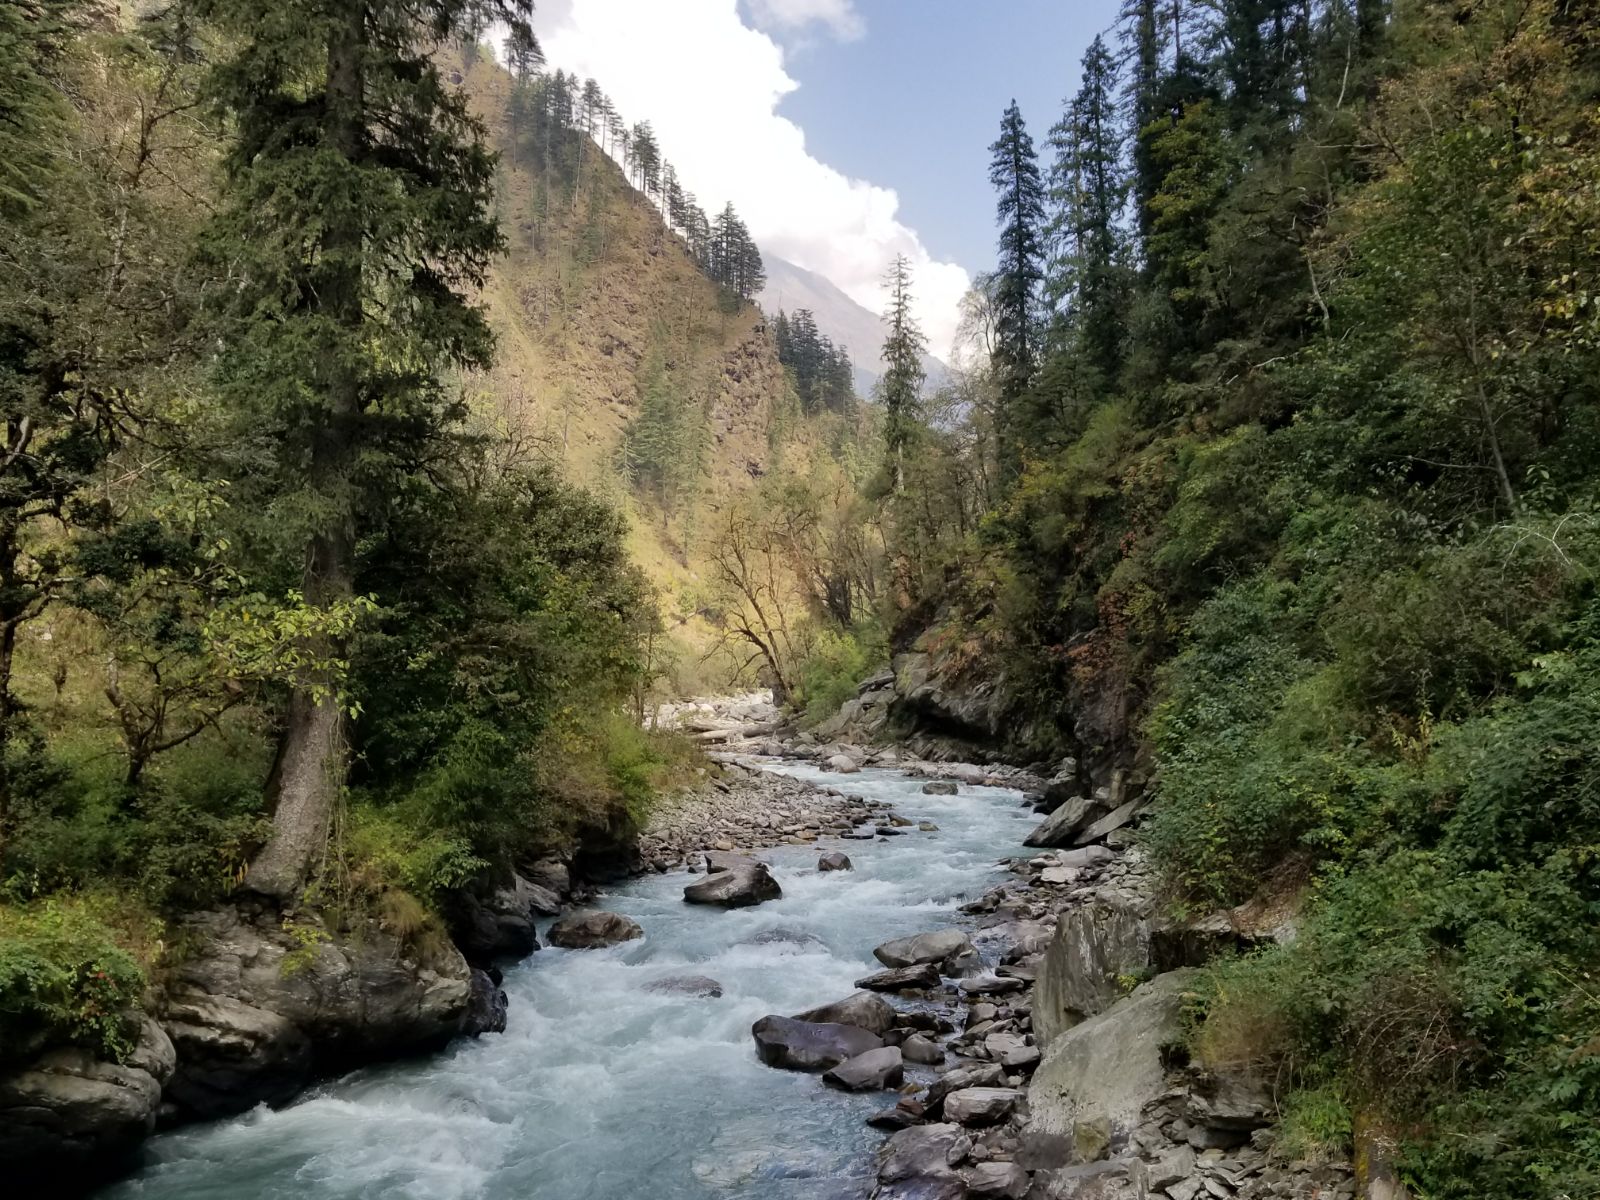 Hiking through lush forests along the Supin river - Himalayan Institute